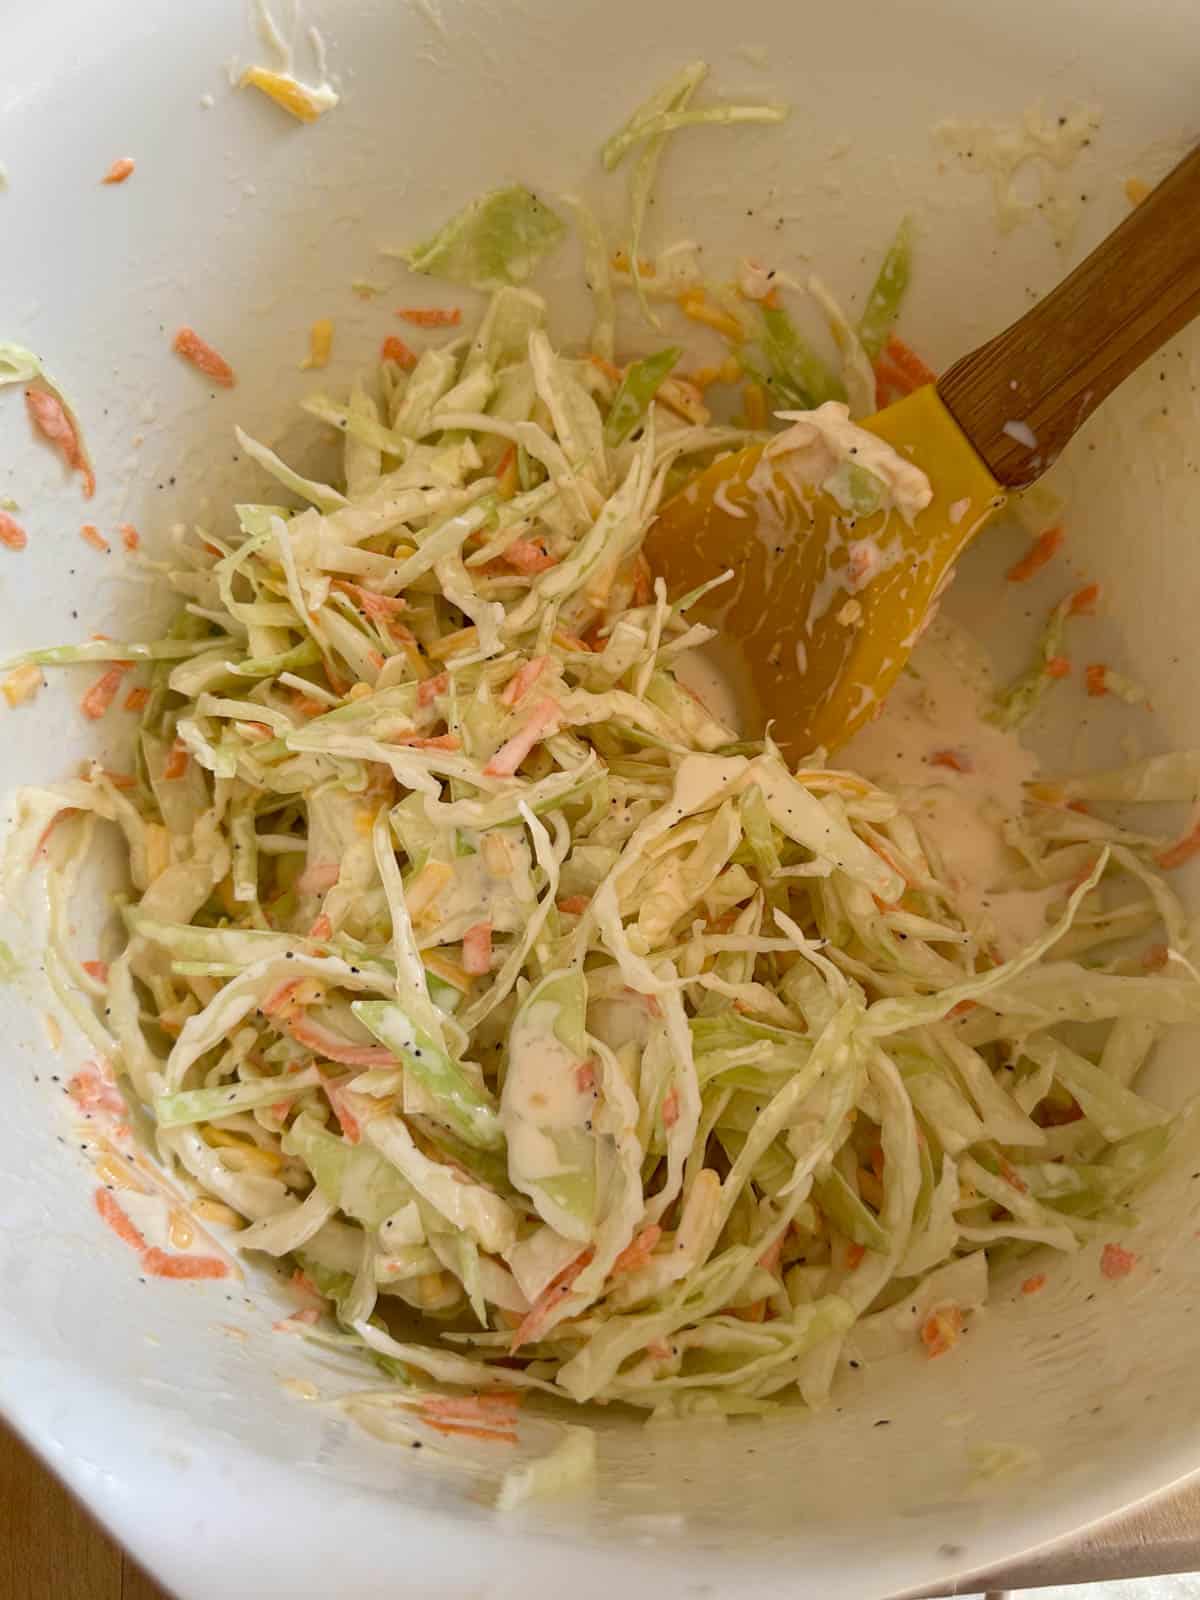 A mixing bowl containing coleslaw with a yellow spoon in the mixing bowl.